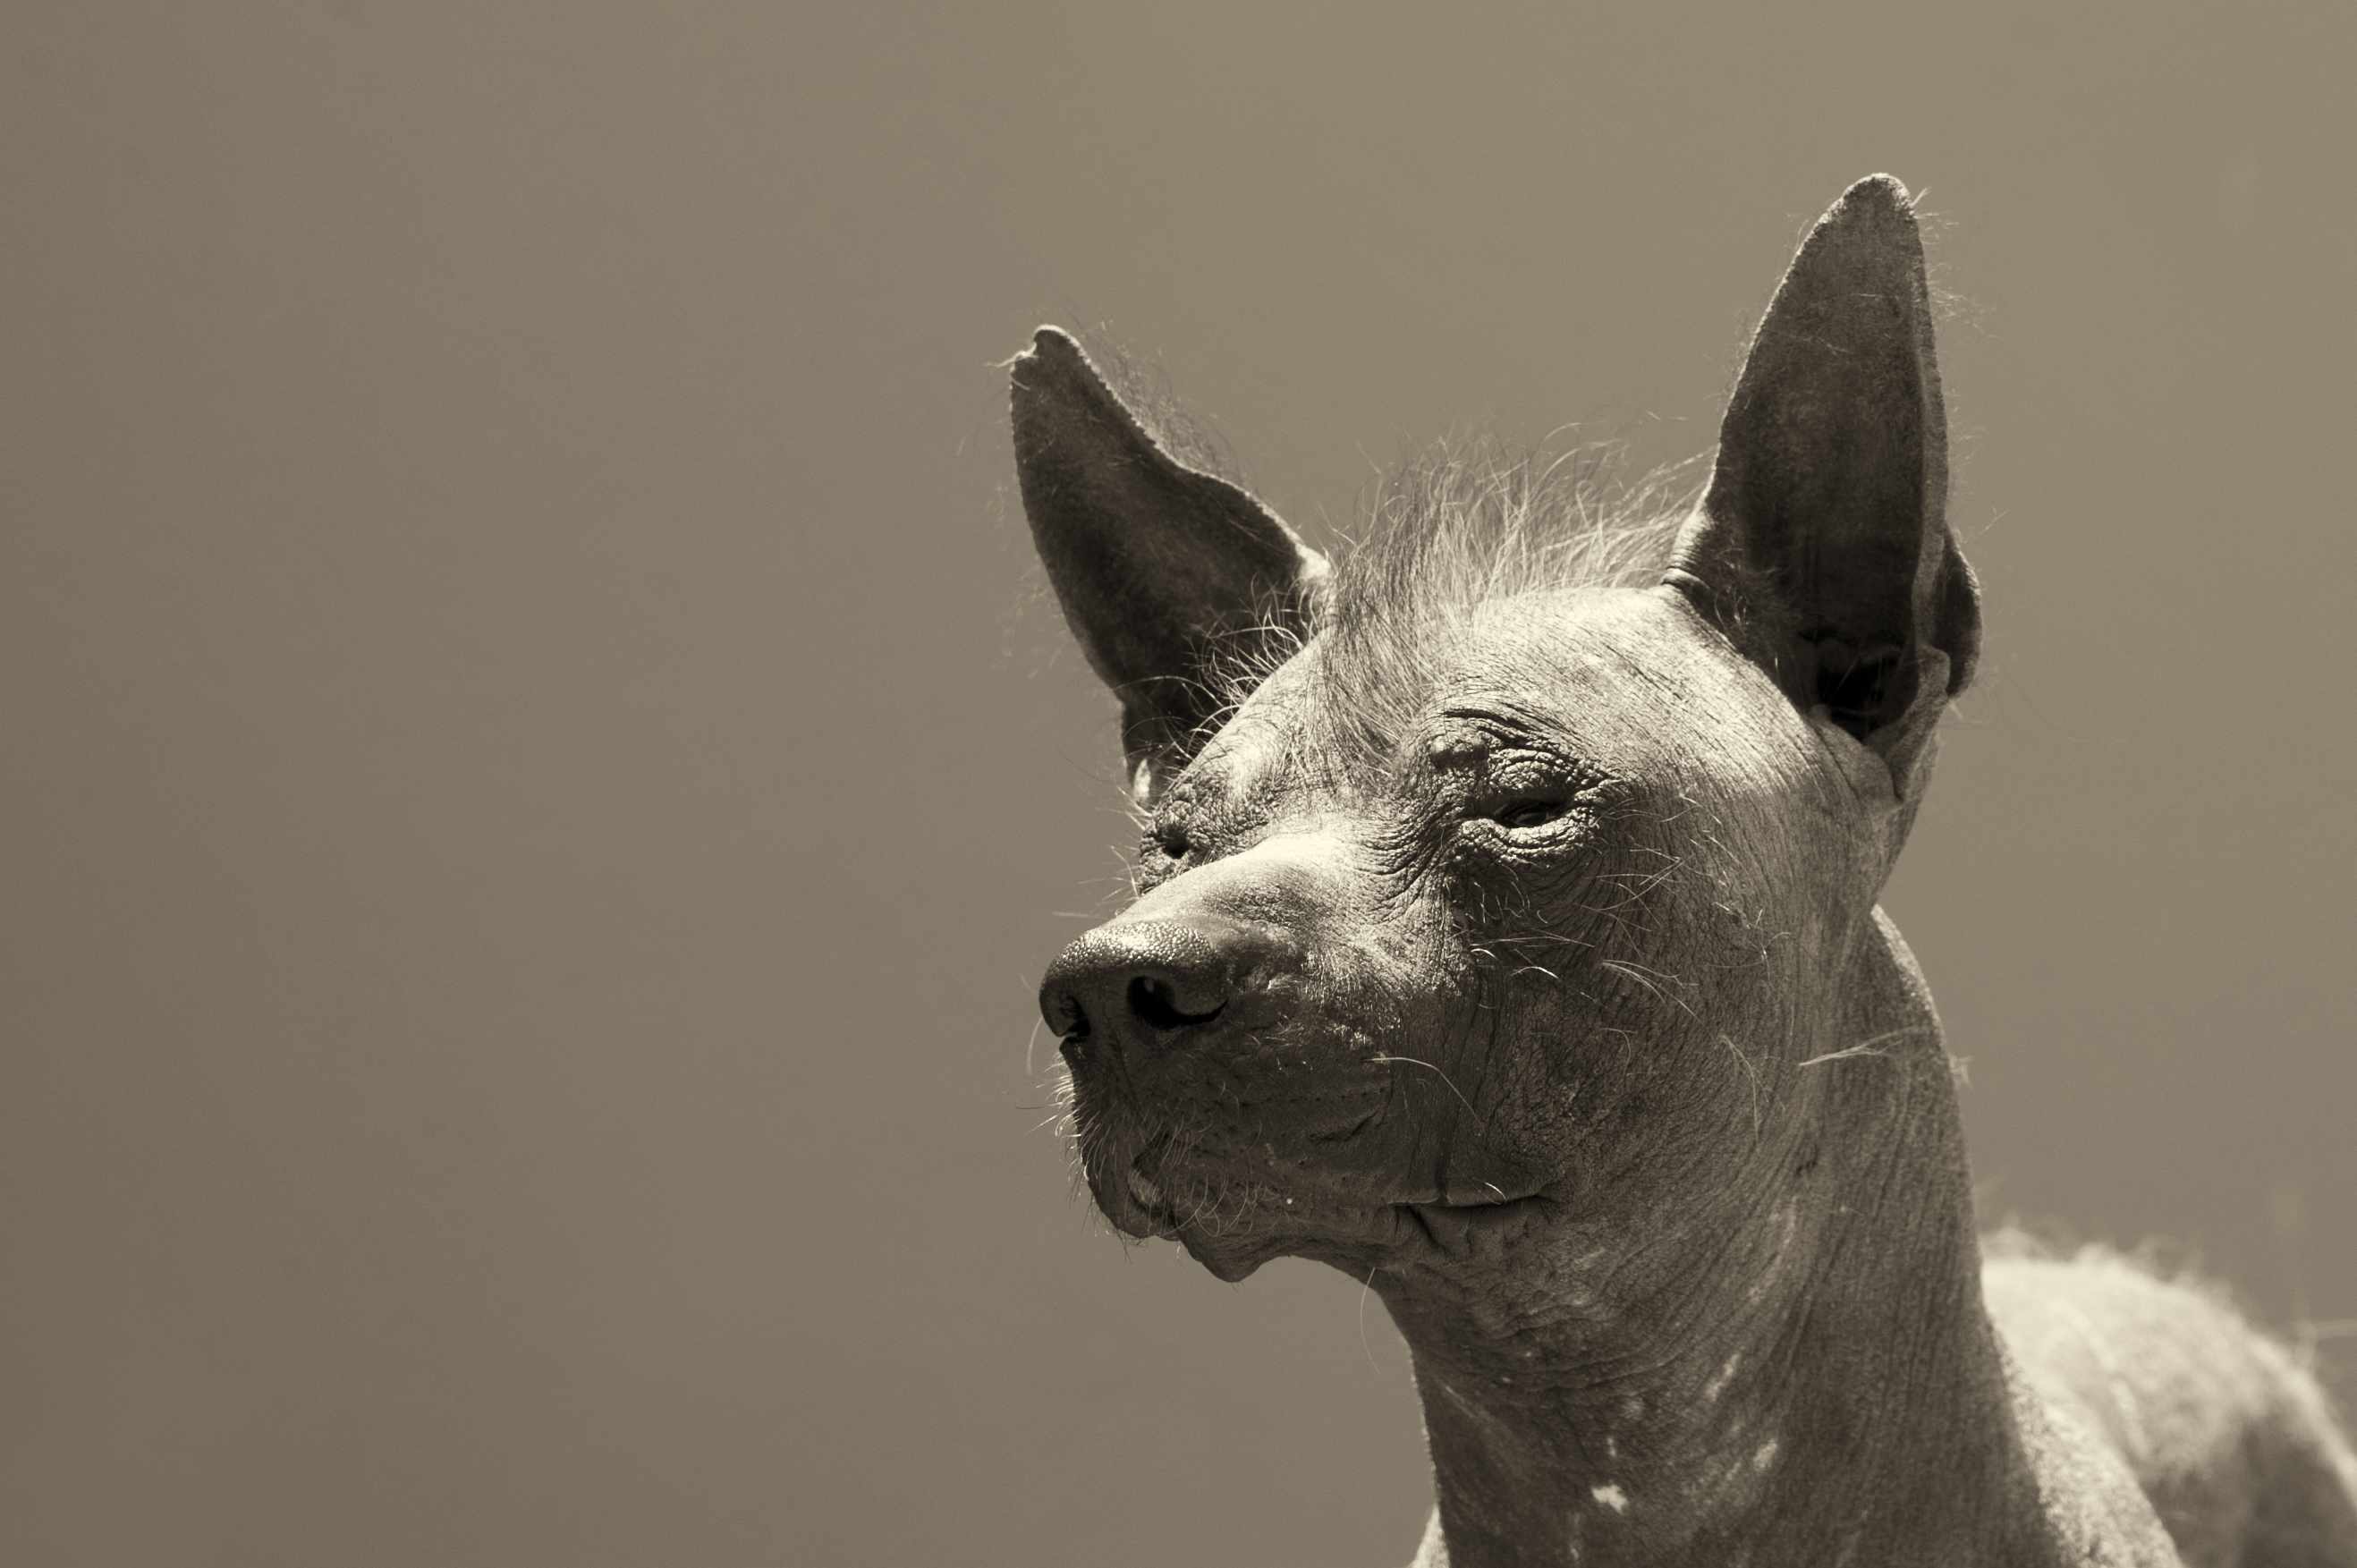 A slightly hairy, but mostly hairless, dog with wrinkled eyes looking to its right.